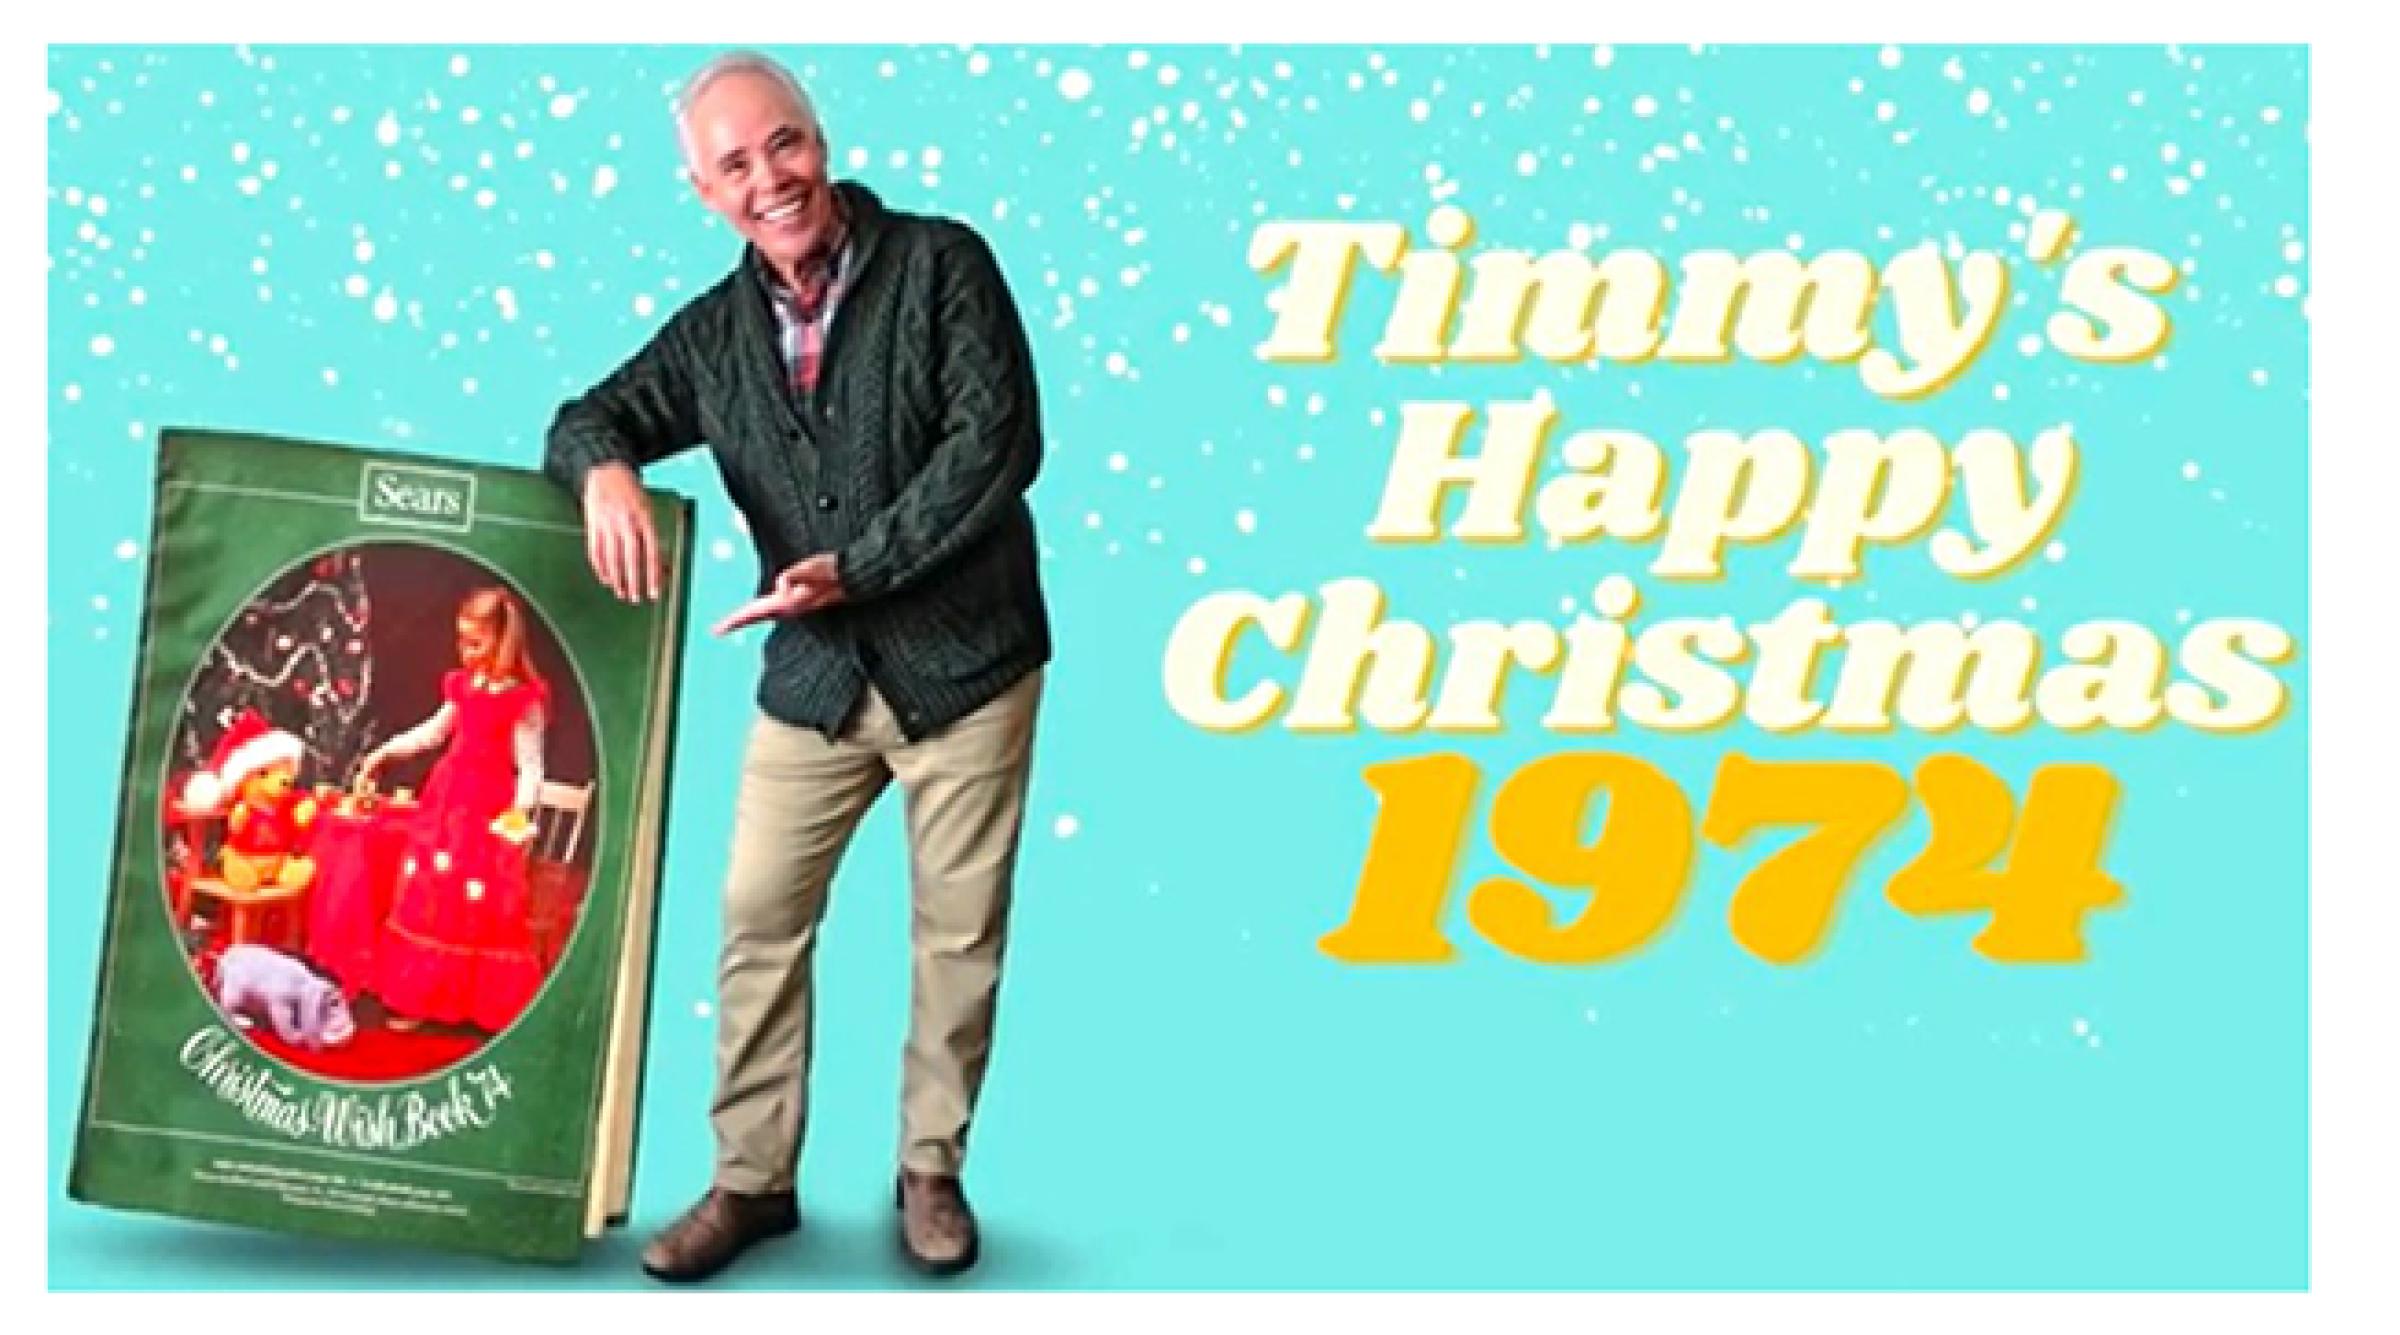 Timmy's Happy Christmas 1974 graphic